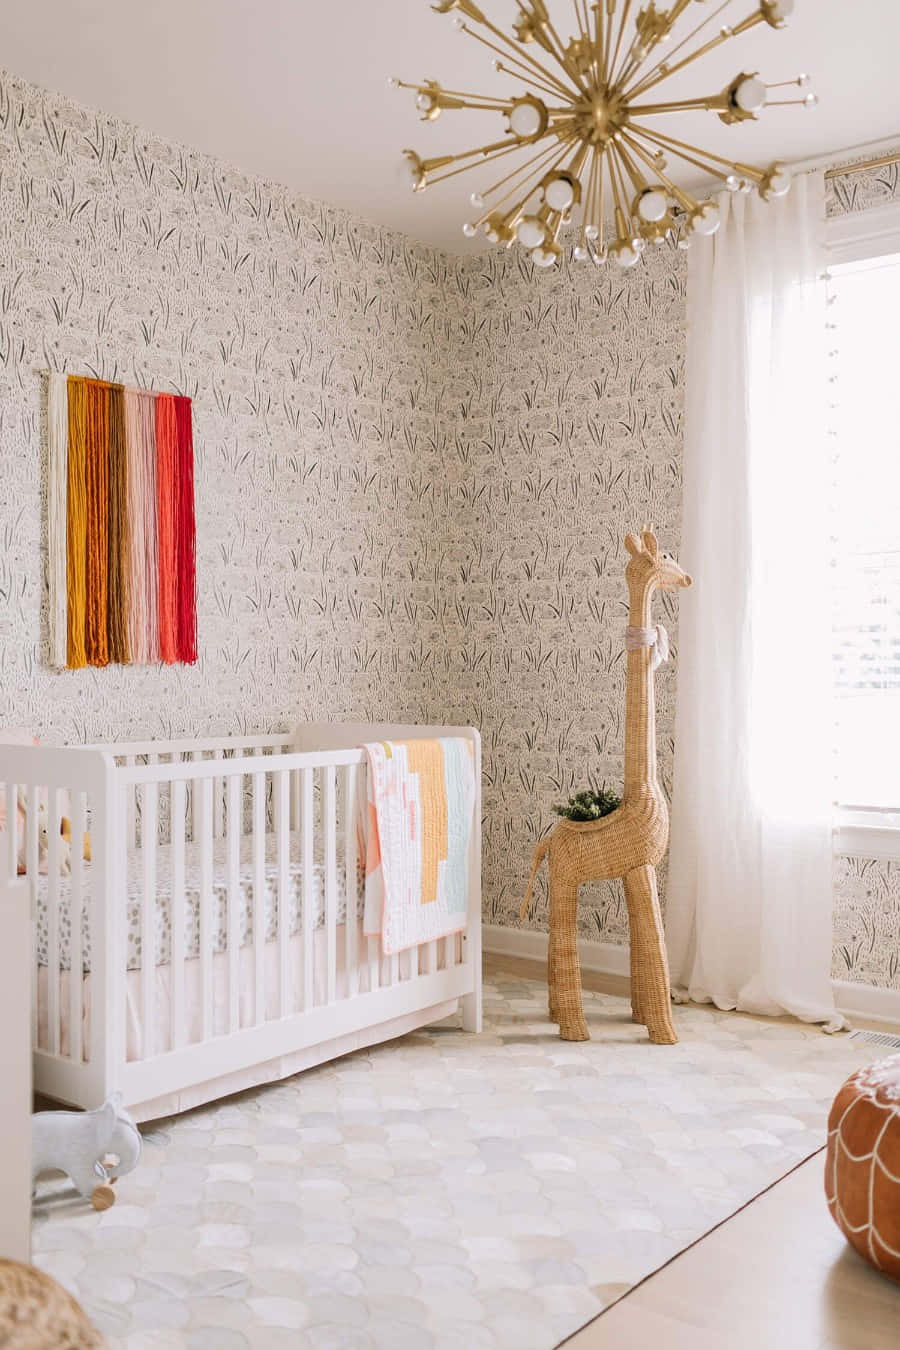 Chic Nursery Room With Giraffe Accent Wallpaper